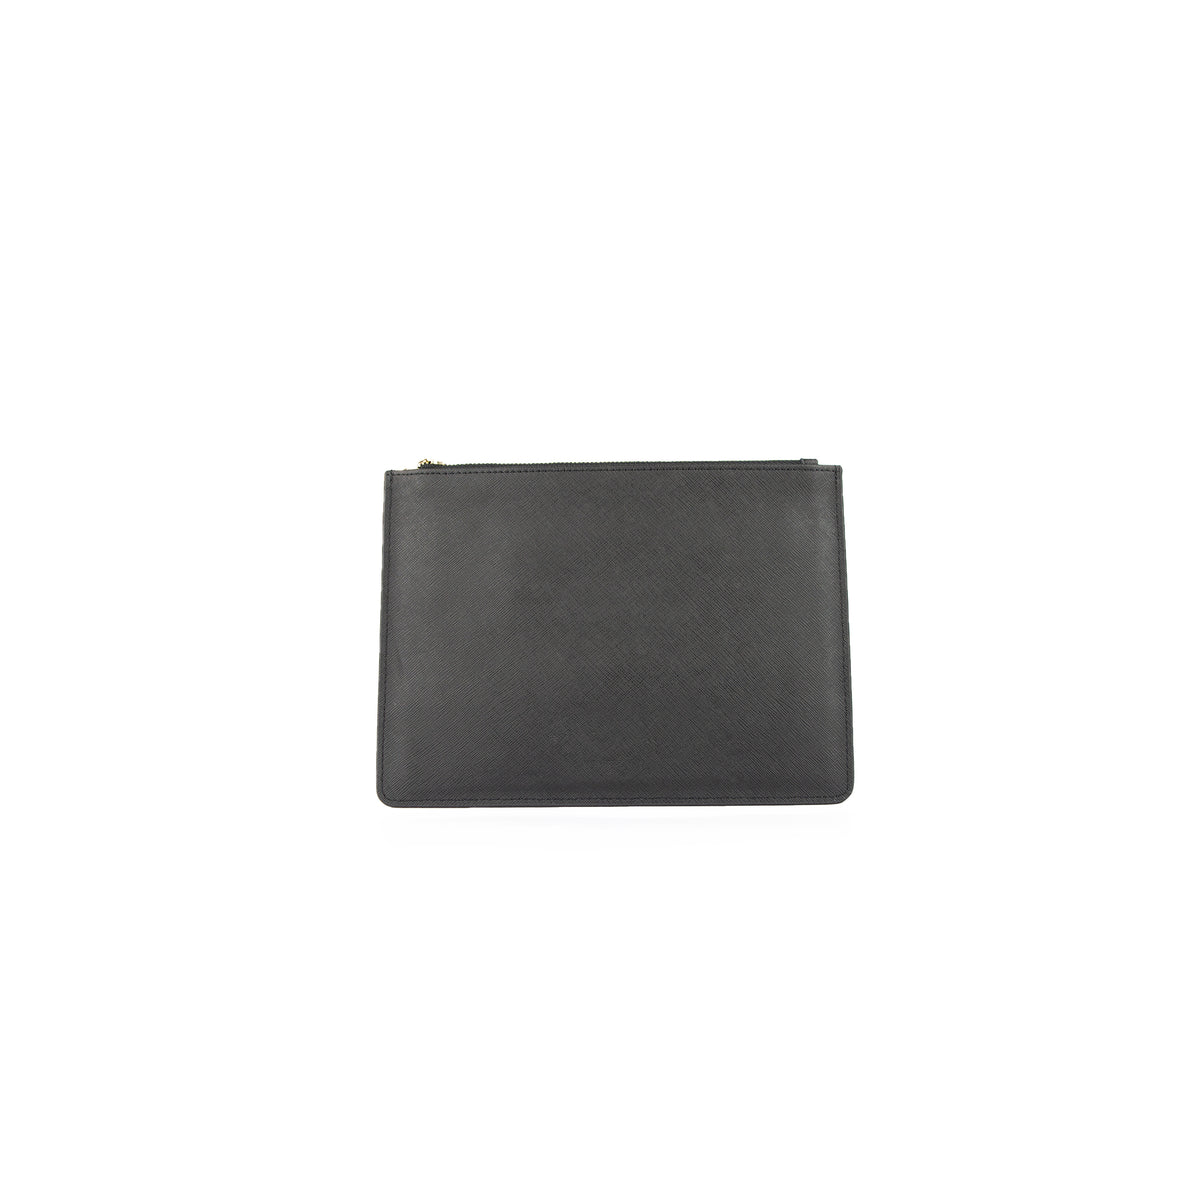 Personalised Pouch - Black Saffiano Leather